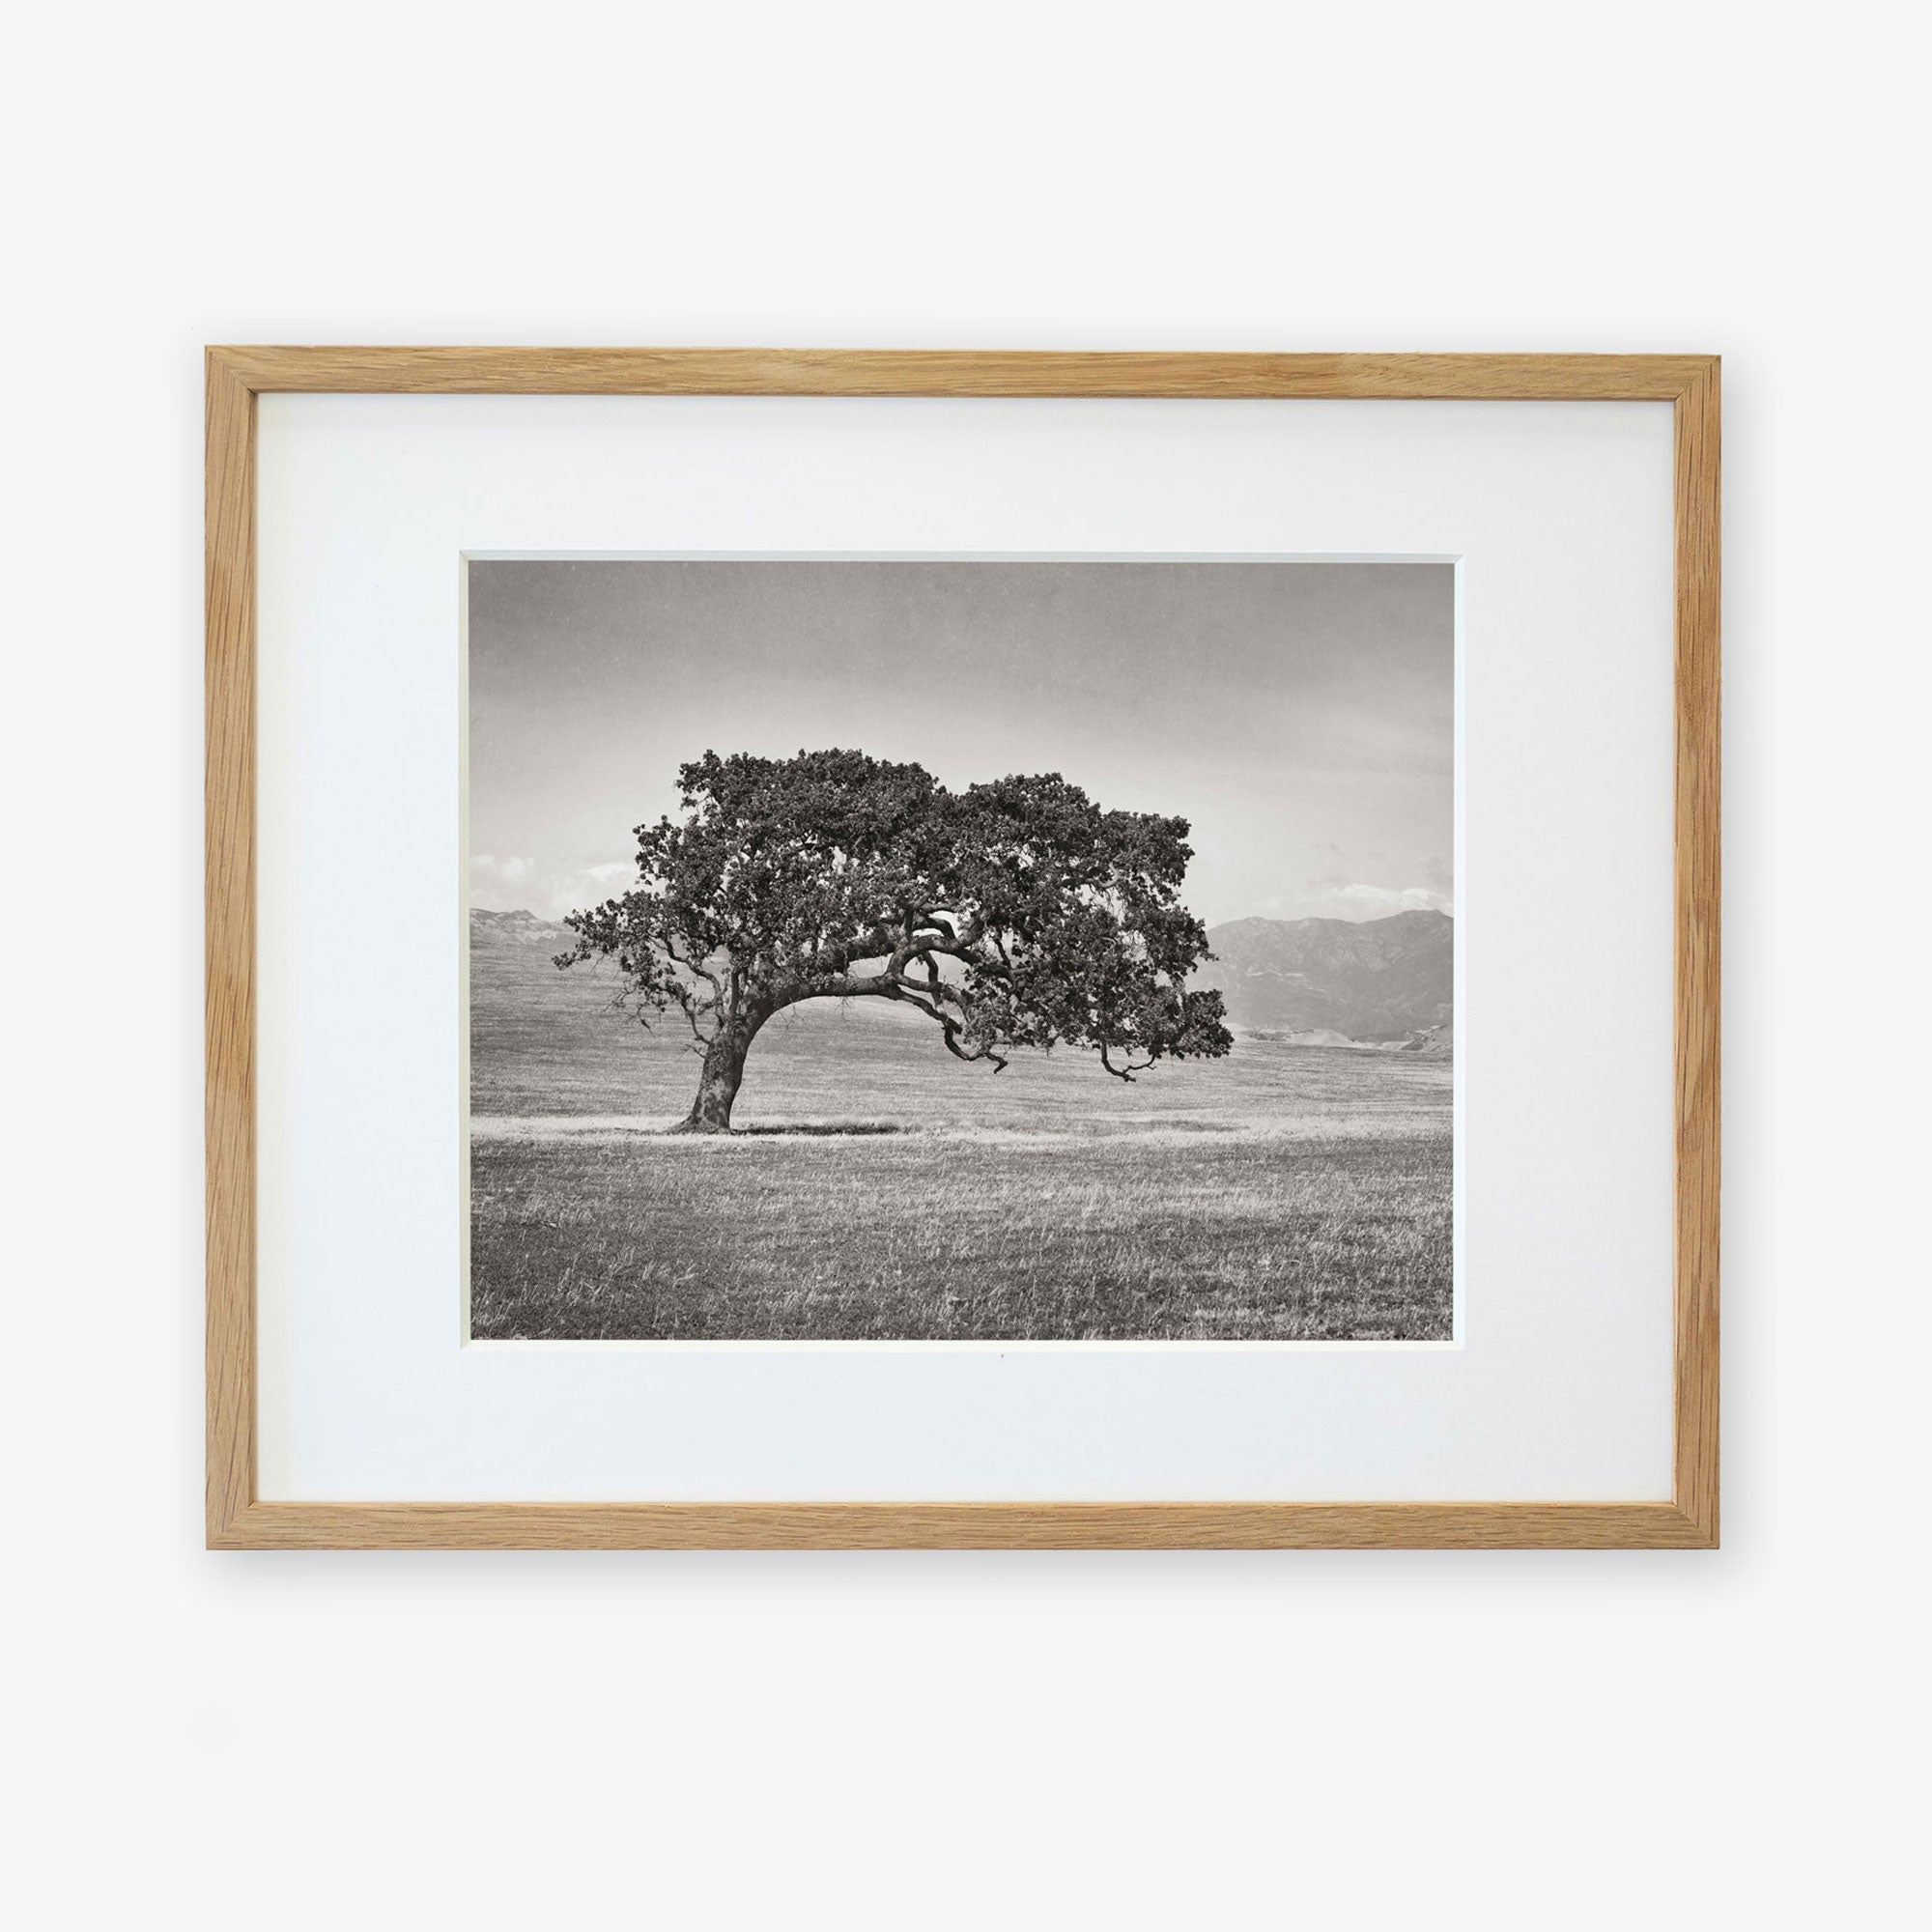 Black and white photograph of a solitary Offley Green &#39;Windswept (Black and White)&#39; Californian Oak Tree Landscape in a grassy field framed in a light wooden frame, hung on a white wall.